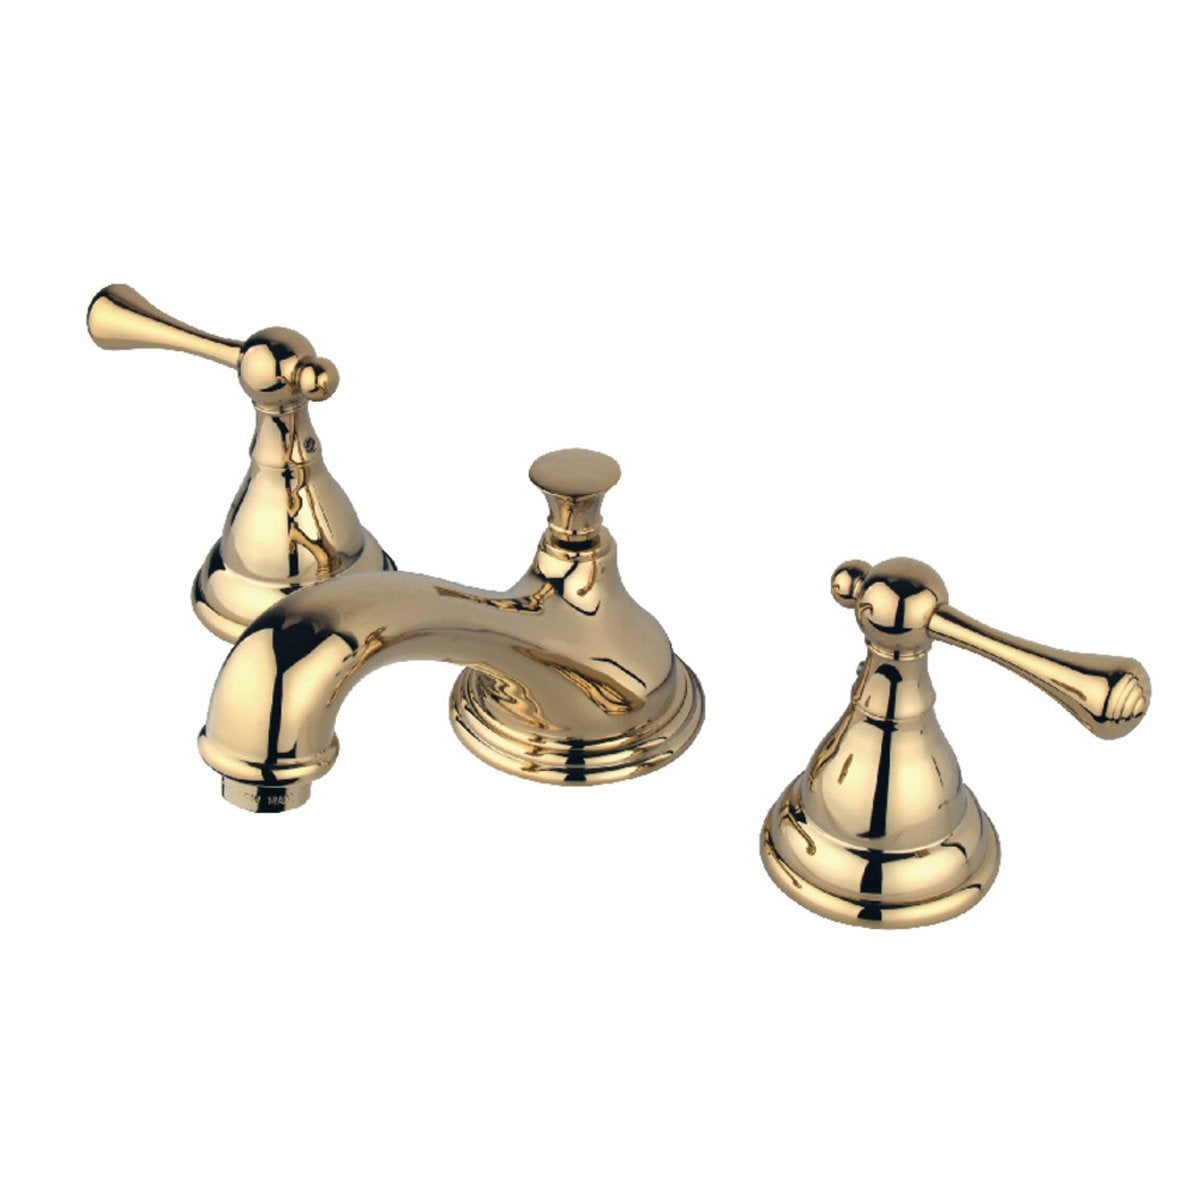 Kingston Brass 8-Inch Widespread Three-Hole Bathroom Faucet with Brass Pop-Up-DirectSinks